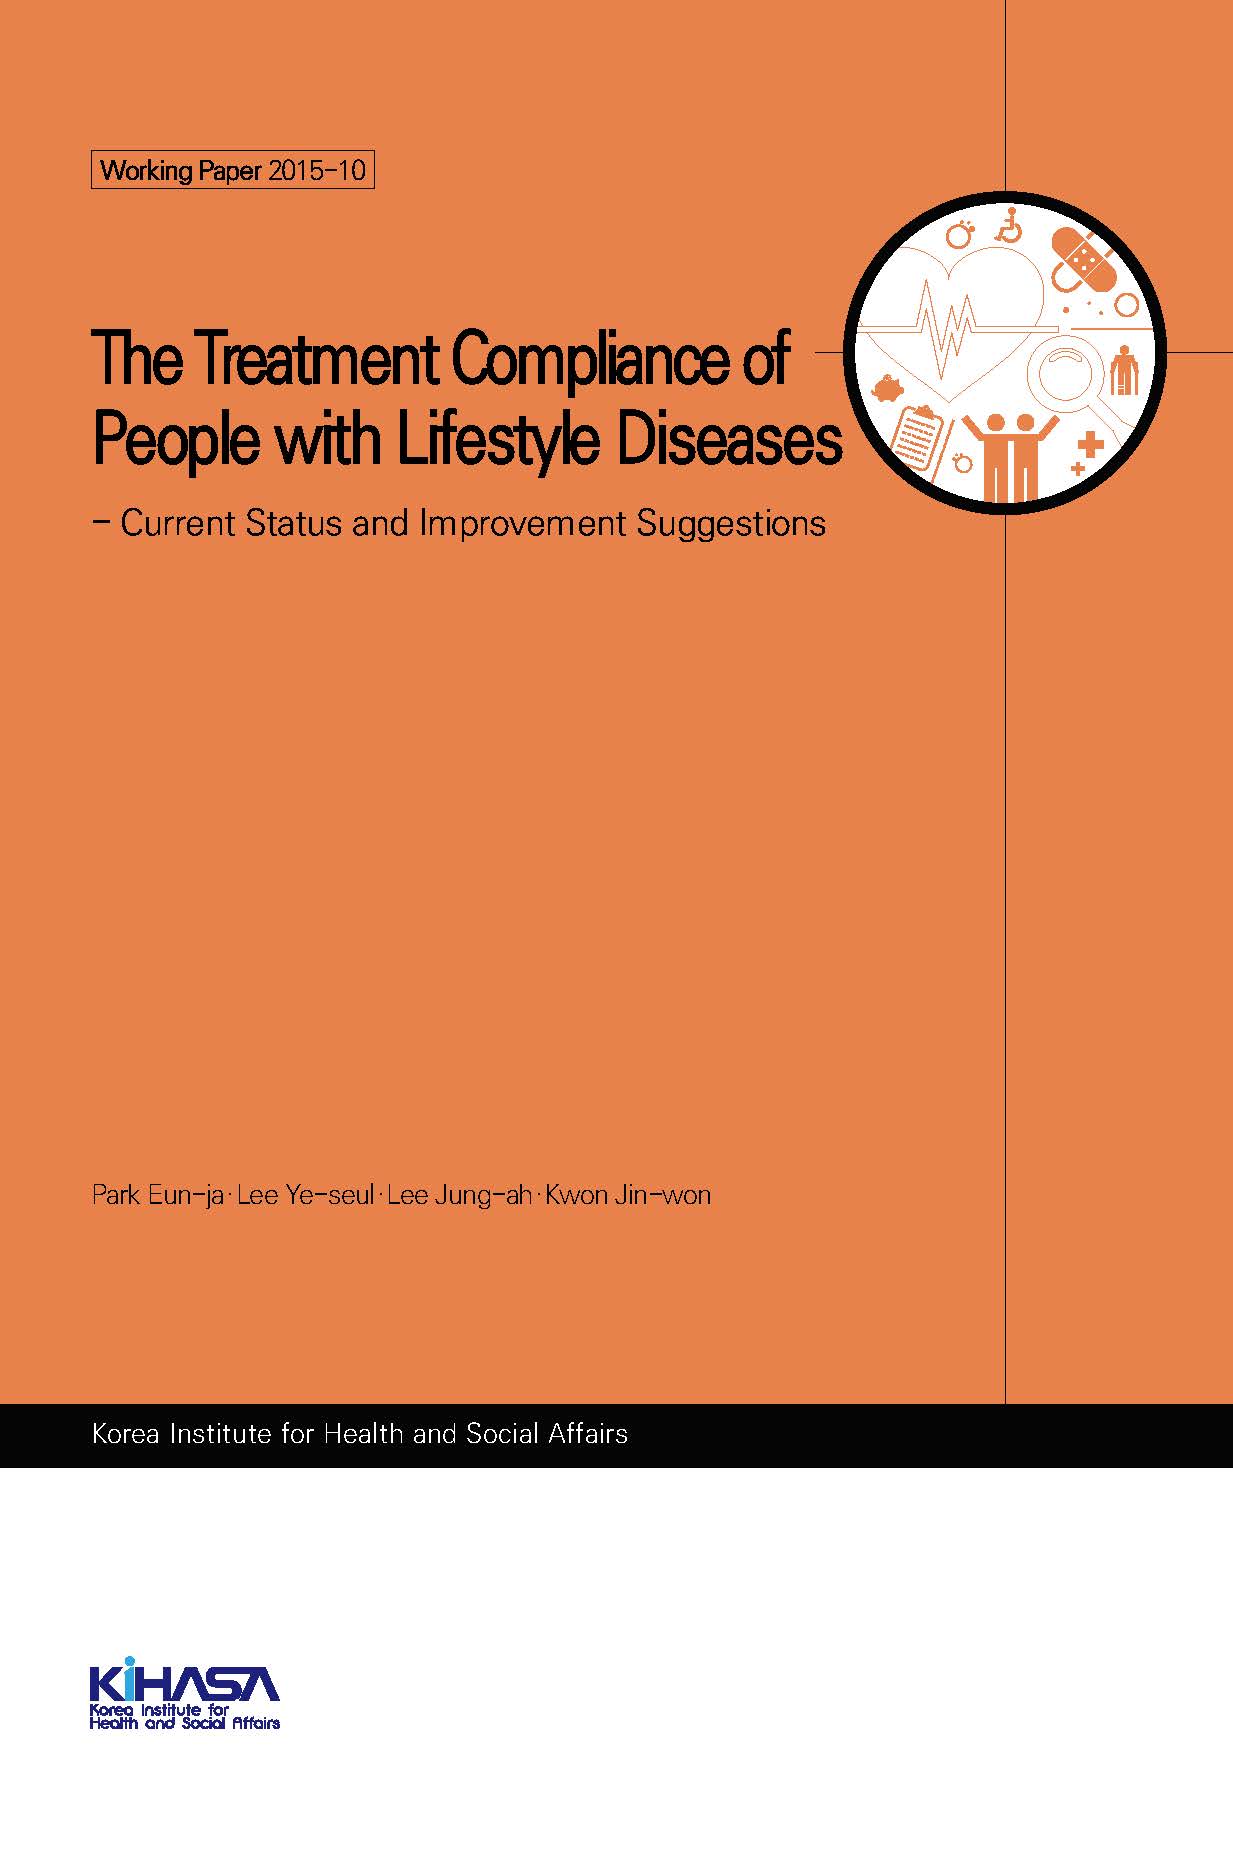 The Treatment Compliance of People with Lifestyle Diseases - Current Status and Improvement Suggestions